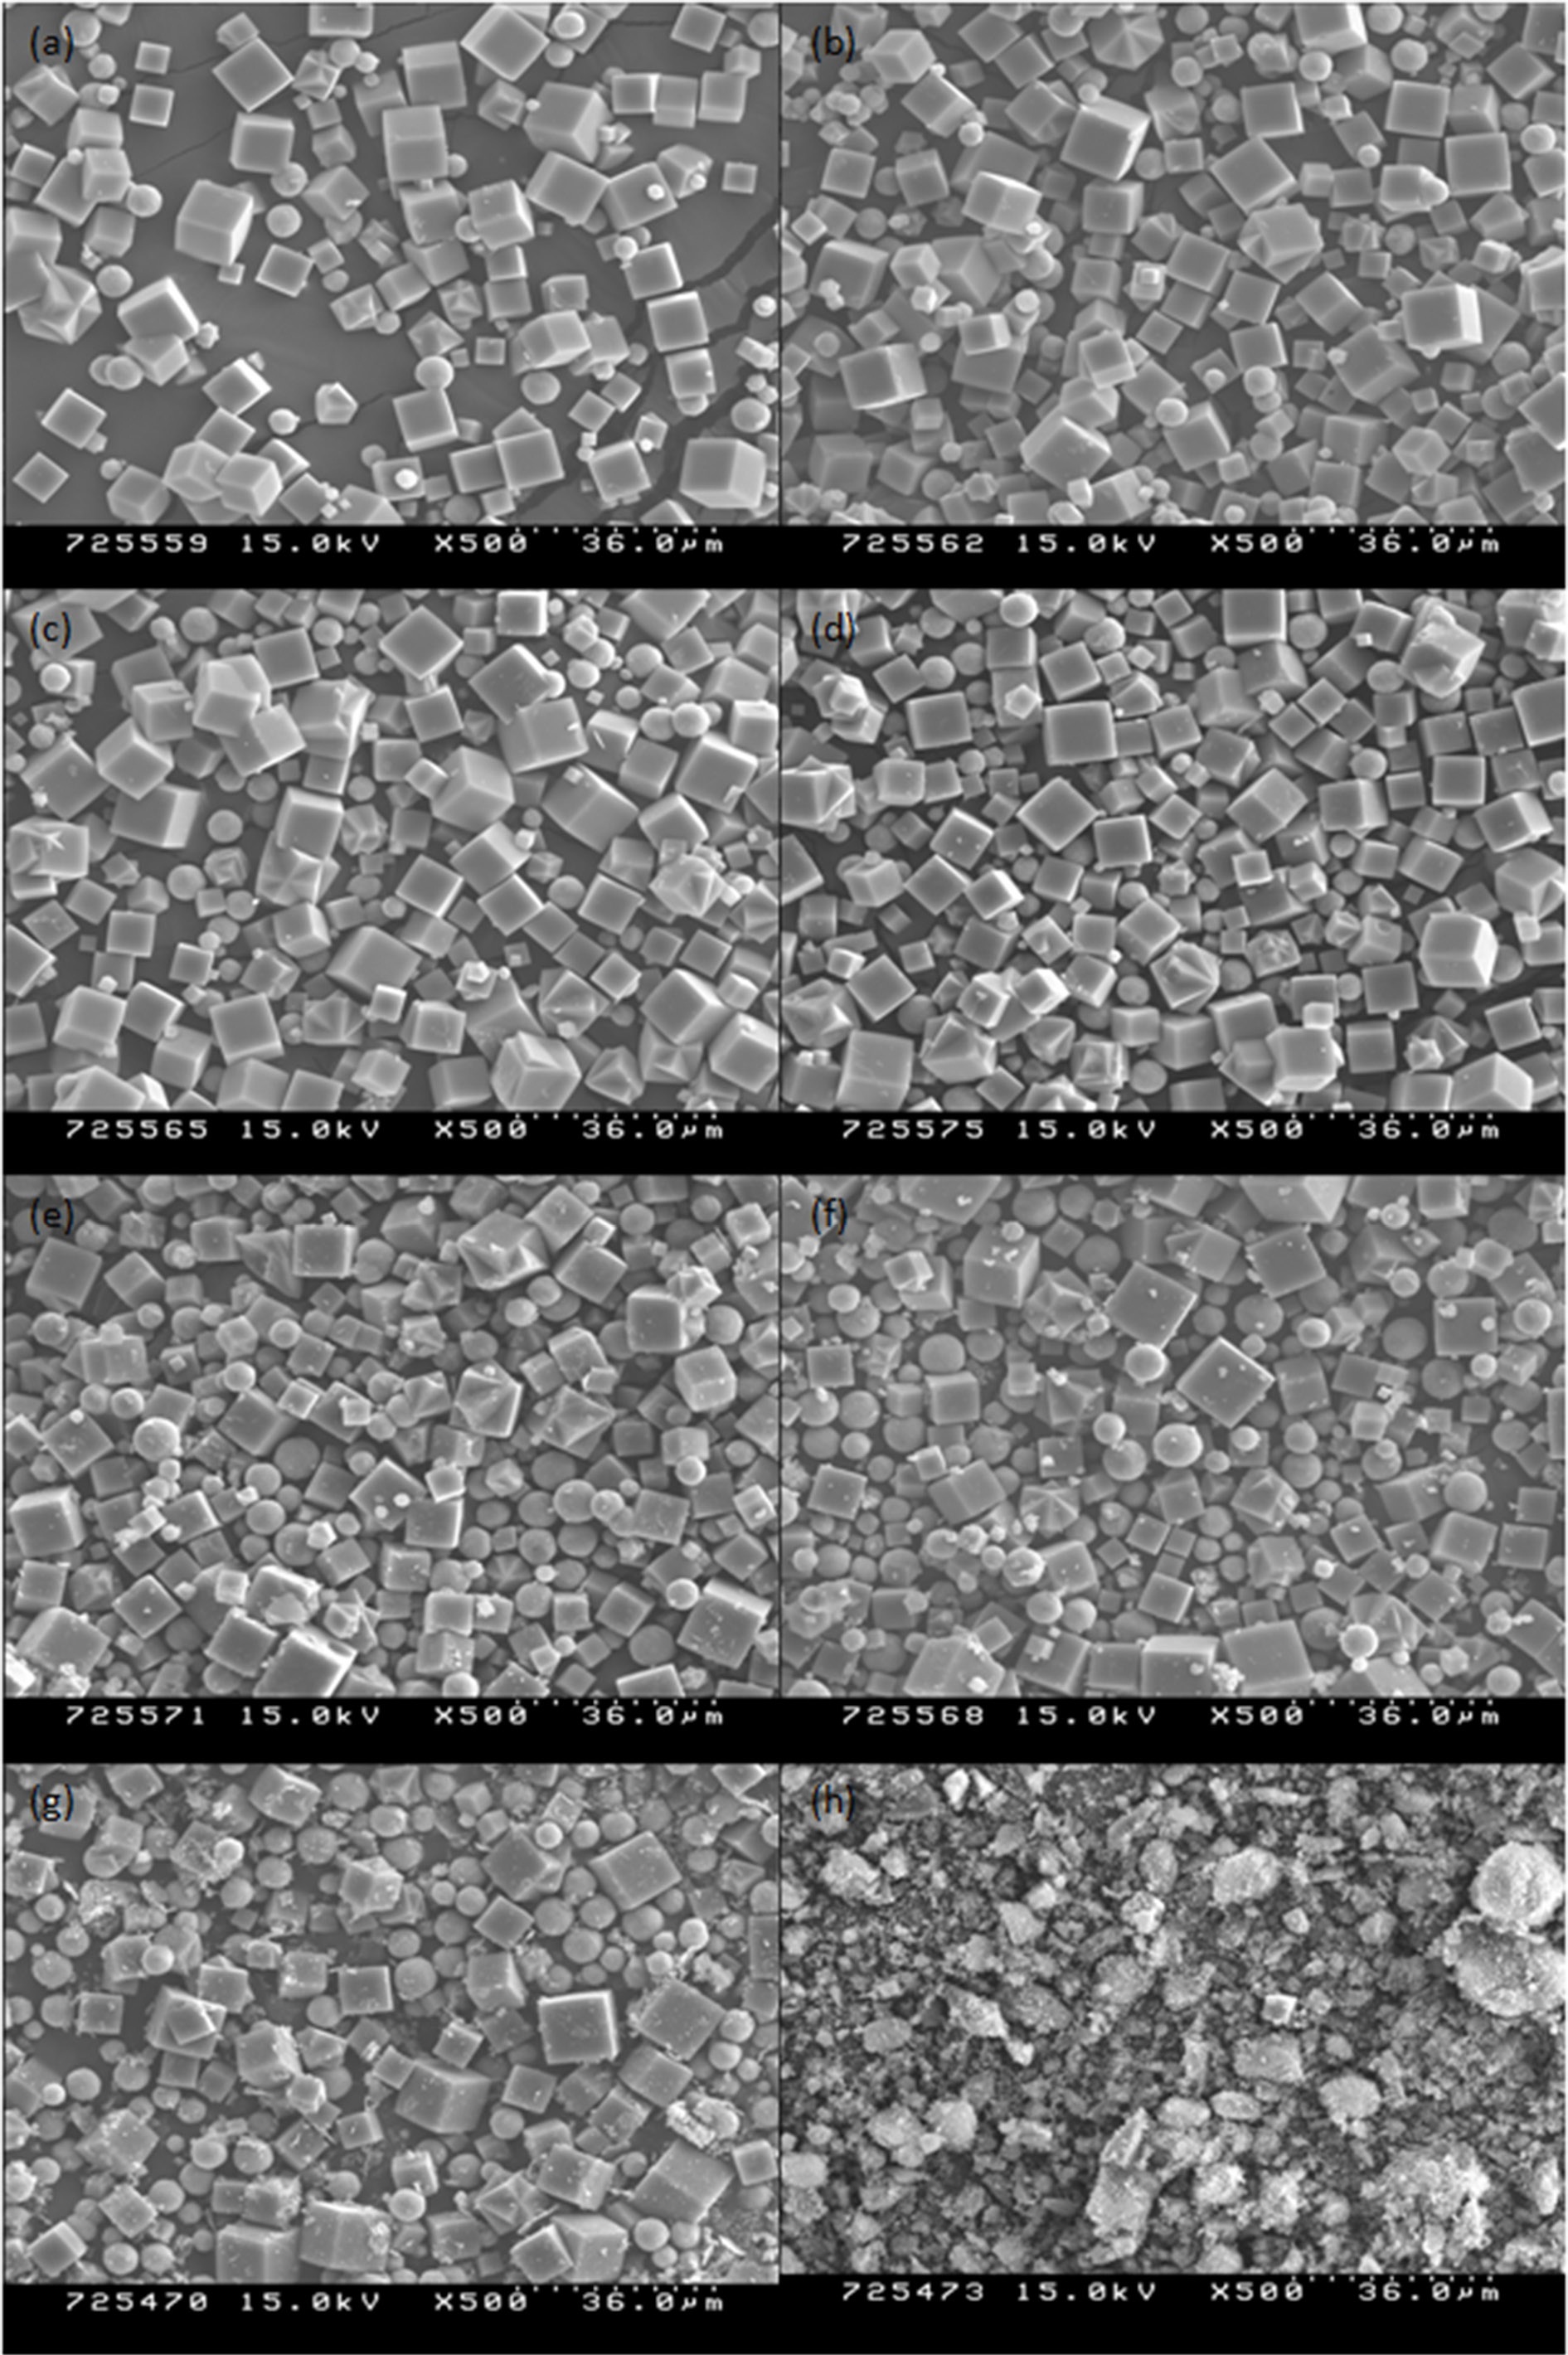 Scanning electron microscopy images of iron-incorporated zeolite-A prepared under condition 2 of Table 1, where (a) to (h),
respectively; refer to iron contents of 0 (a), 0.001 (b), 0.003 (c), 0.005 (d), 0.01 (e), 0.03 (f), 0.05 (g), and 0.3 (h).